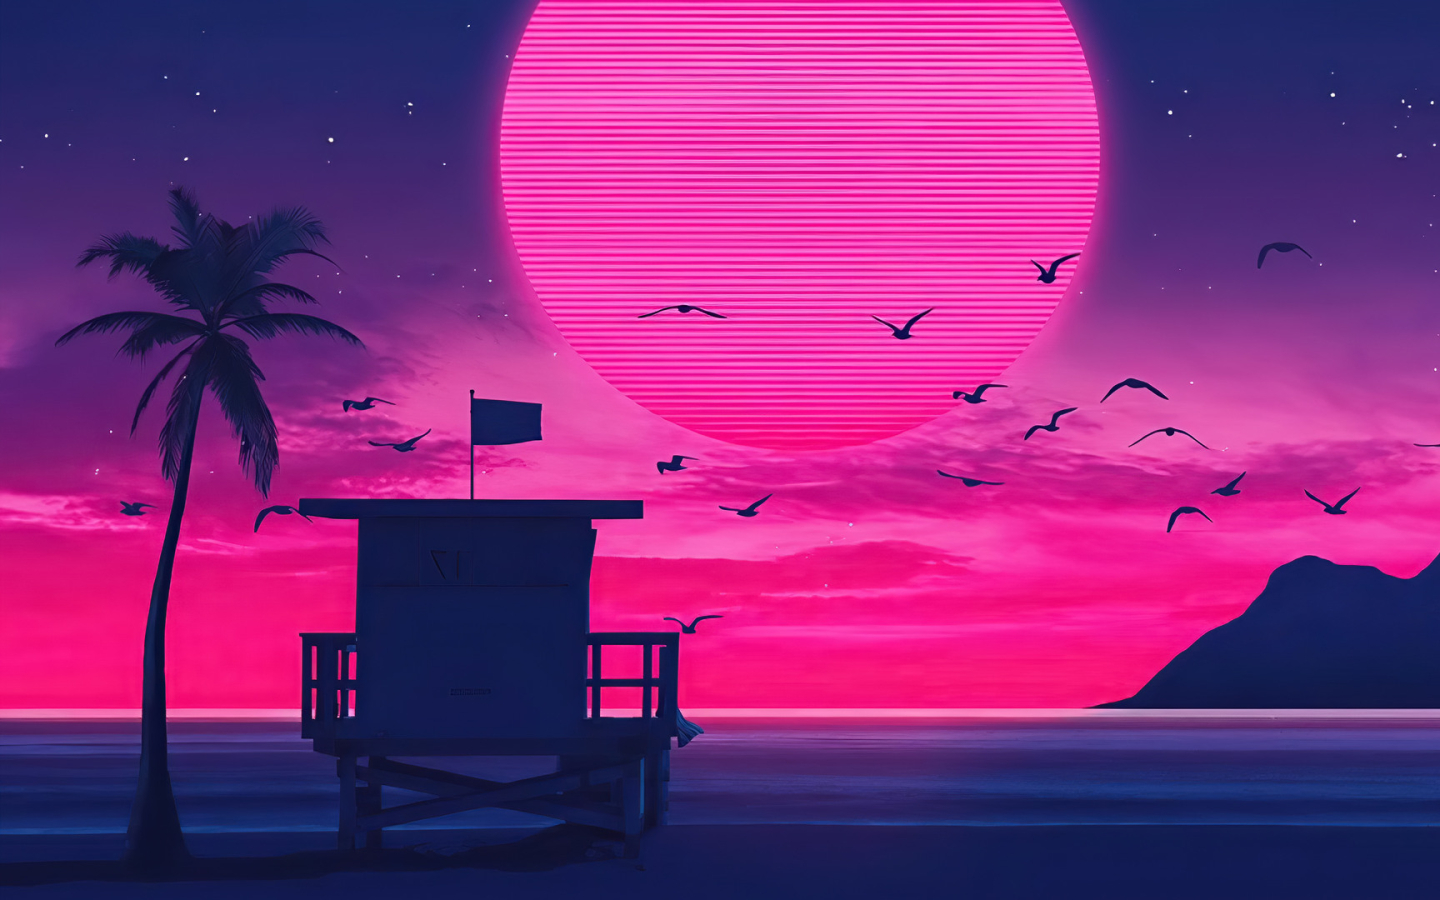 1440x900 Beach Retro Wave 1440x900 Wallpaper Hd Artist 4k Wallpapers Images Photos And Background